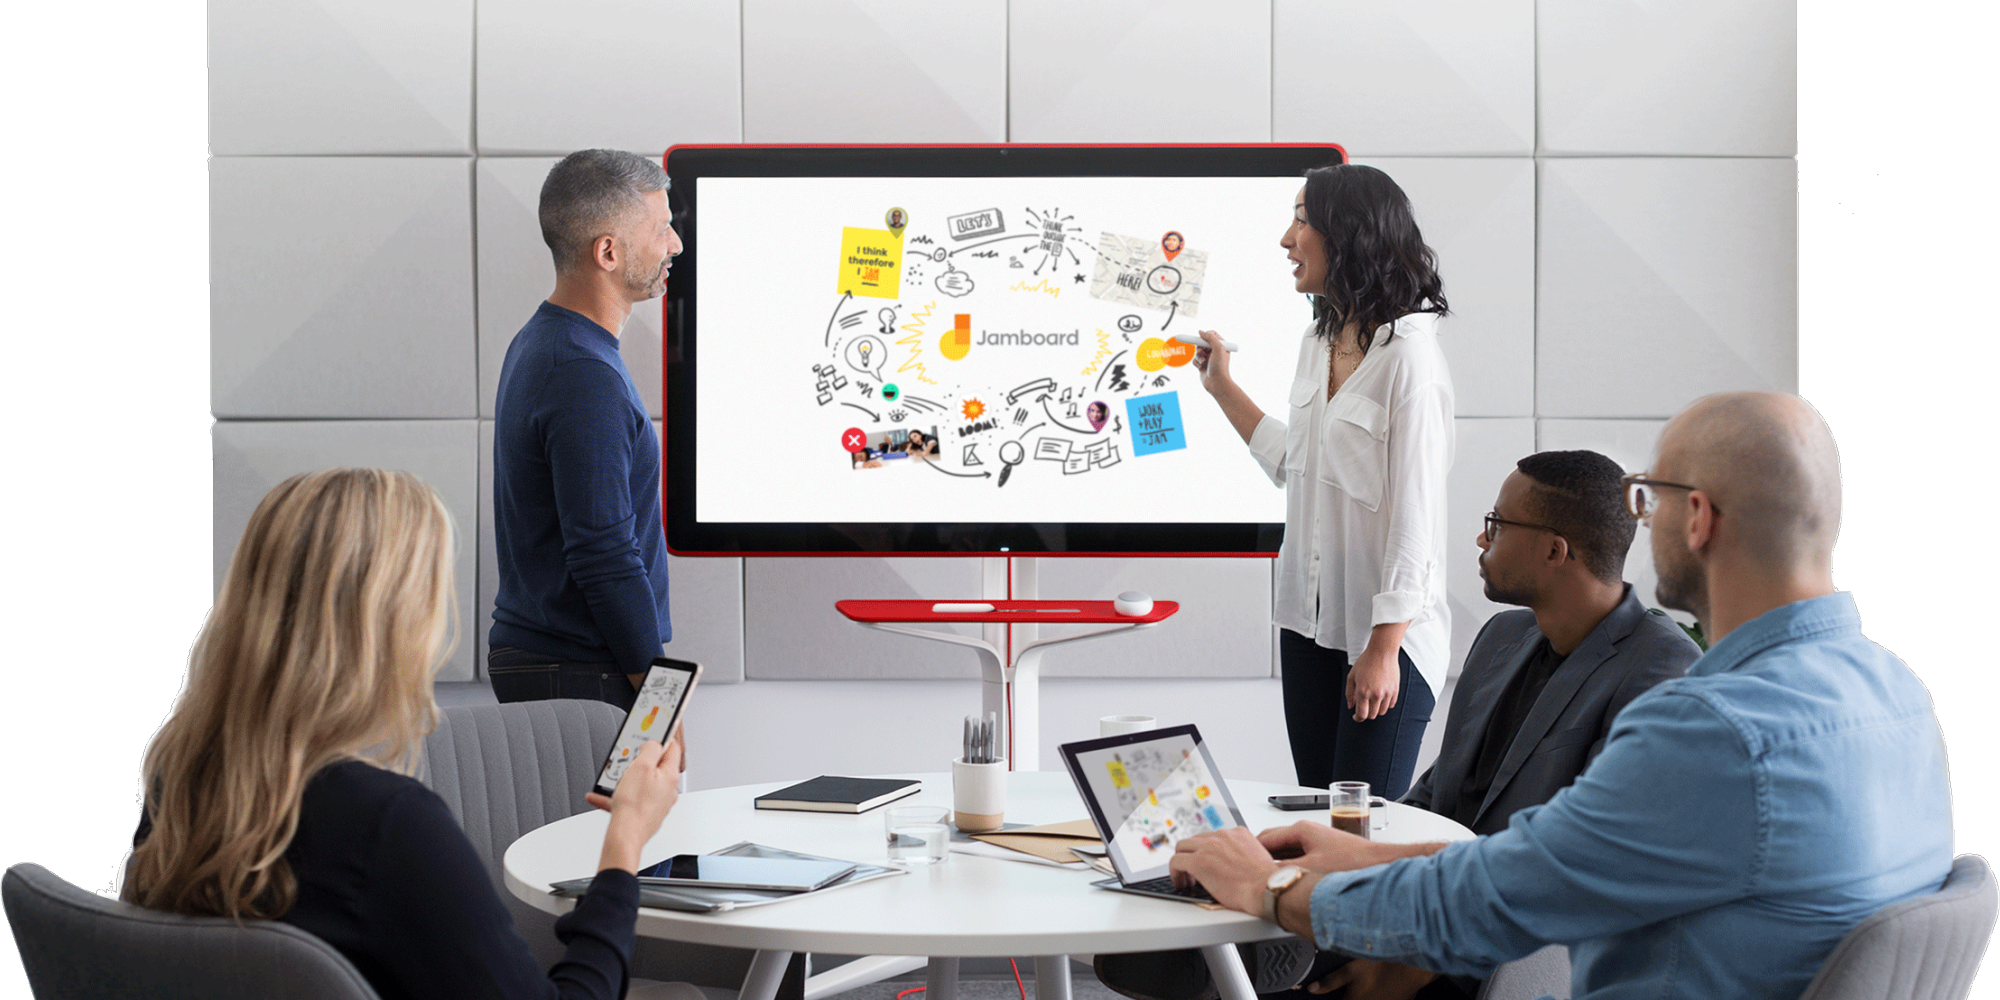 Google Jamboard will compete with Microsoft Surface Hub